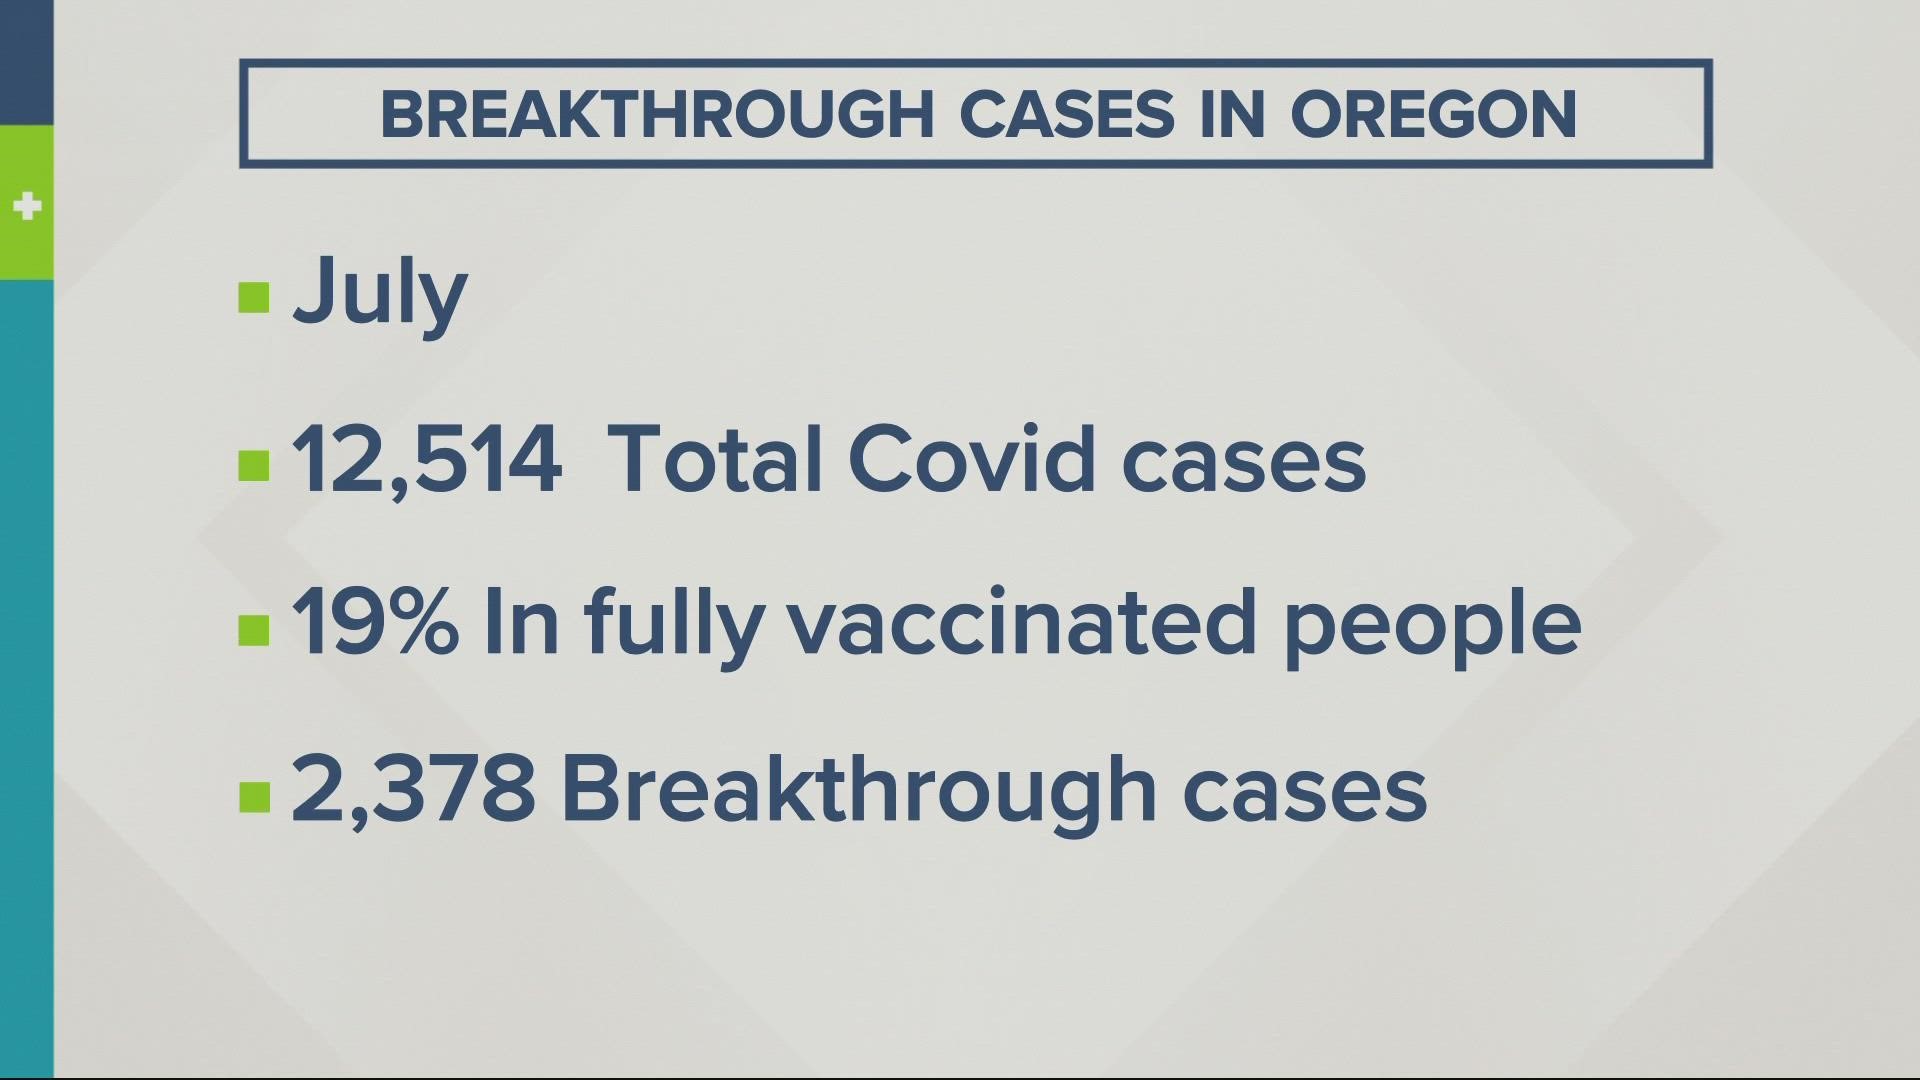 In July, Oregon reported 12,514 cases, 19% were in those fully vaccinated. A study shows vaccines can reduce the risk of hospitalization by 96% for older adults